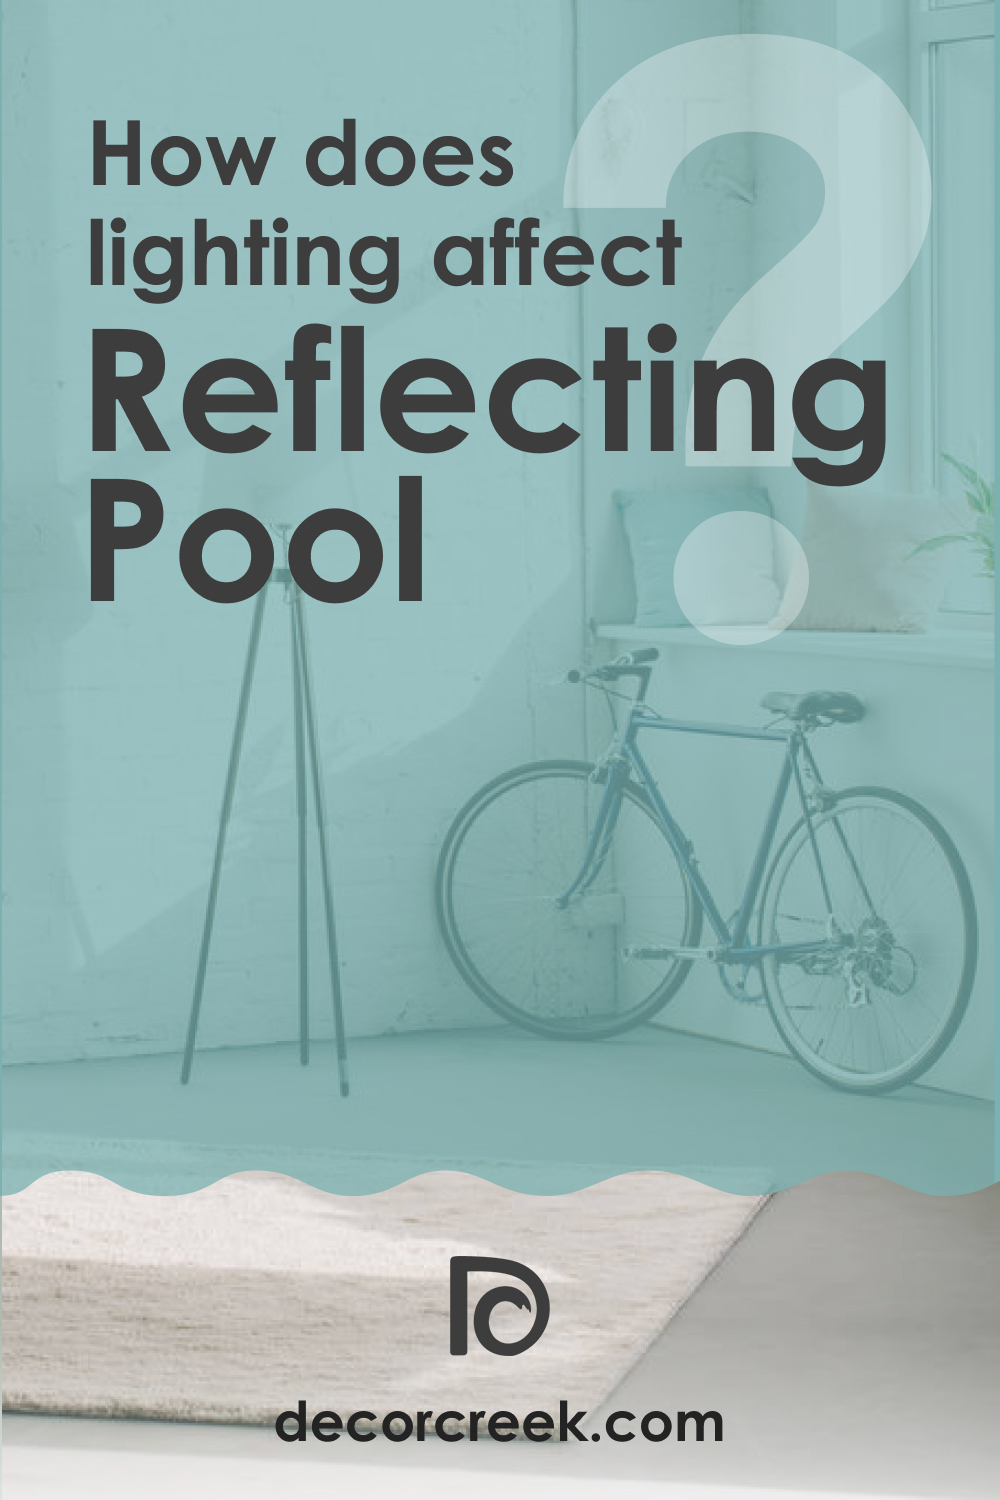 How Does Lighting Affect SW 6486 Reflecting Pool?